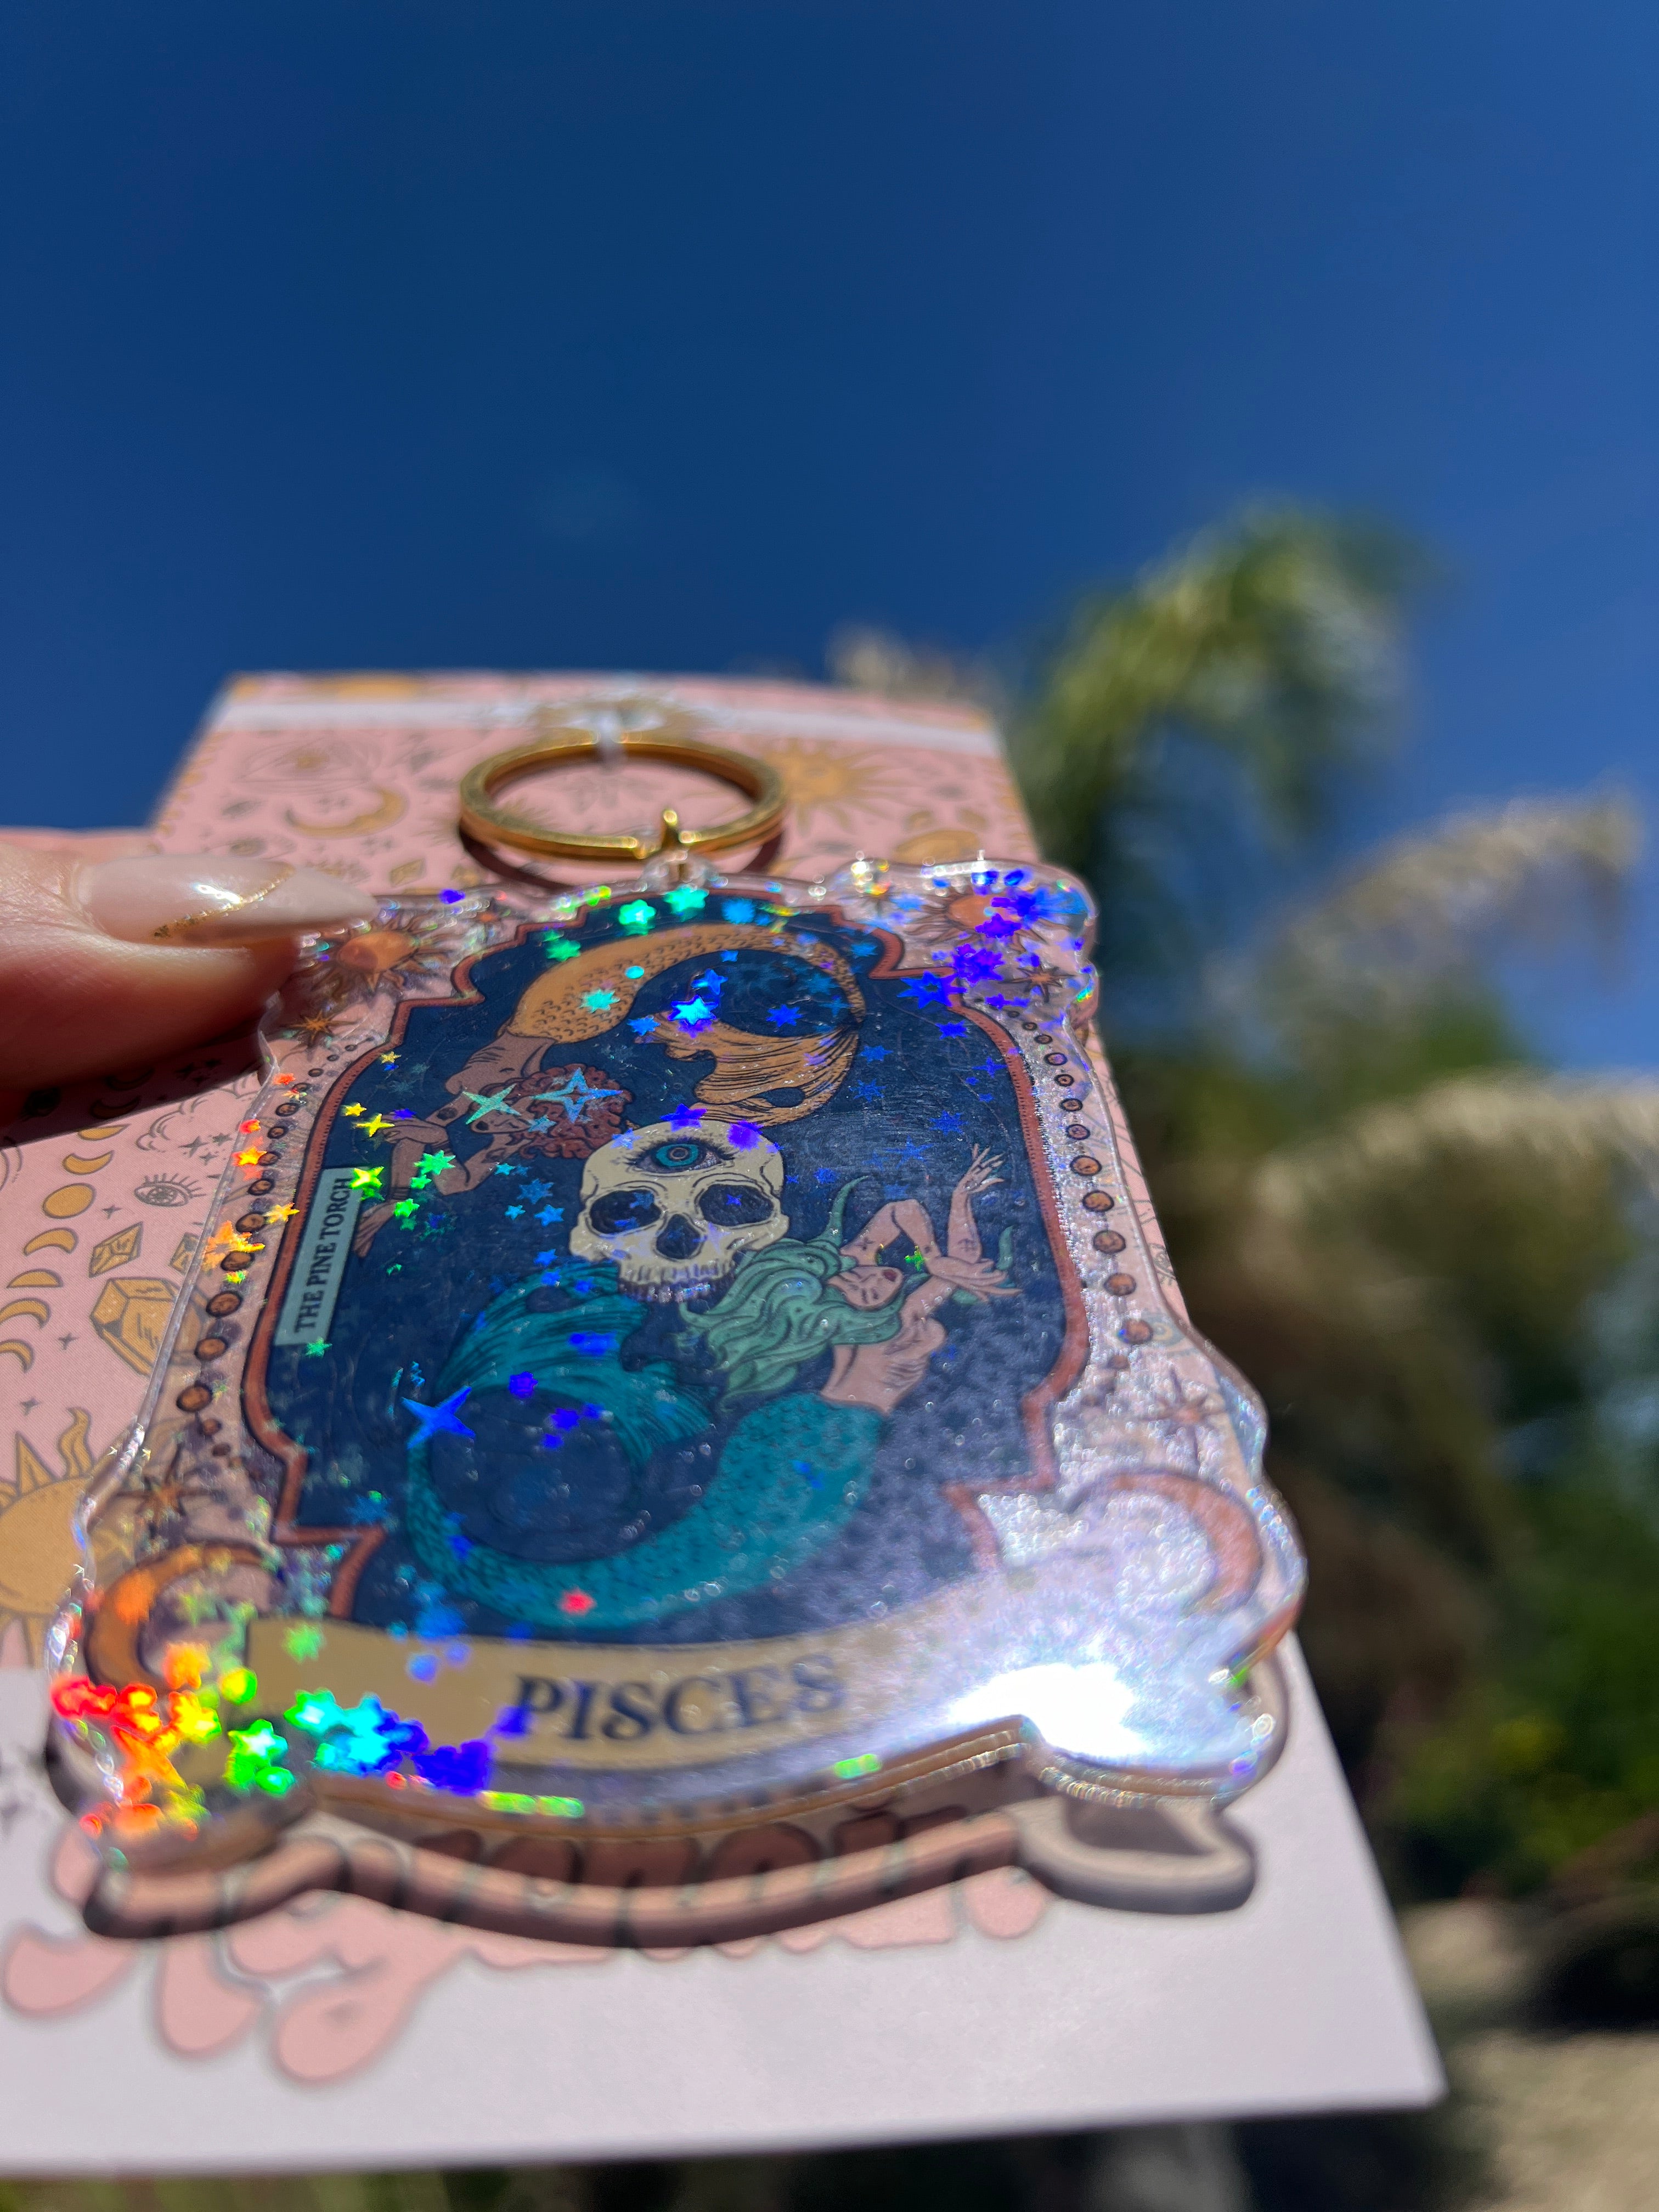 PISCES « HOLOGRAPHIC KEYCHAIN »